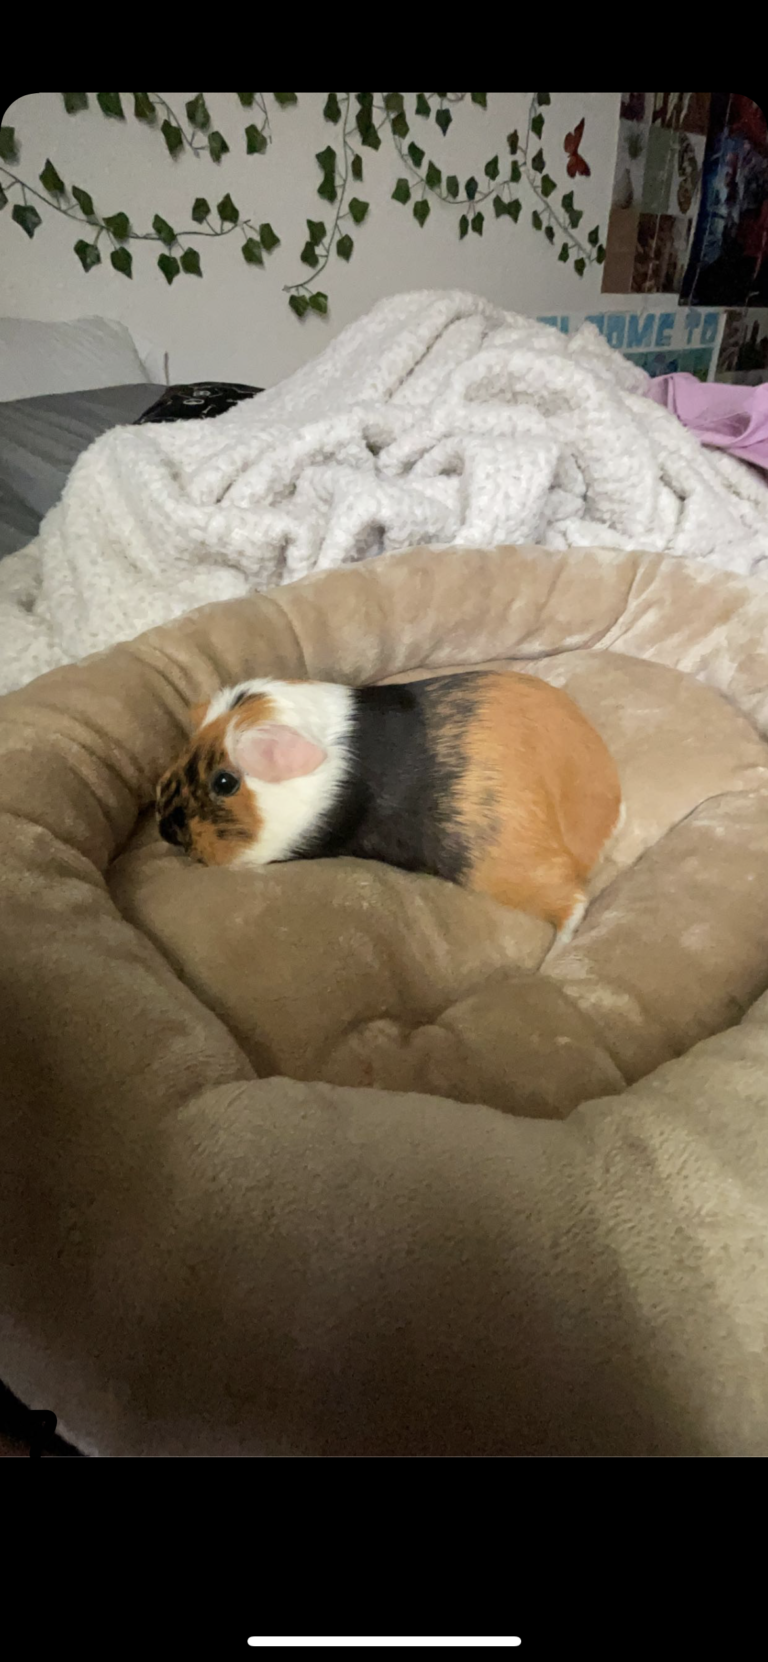 “Beyond the Cuteness: The Fascinating Reasons Behind Guinea Pig Adoration”